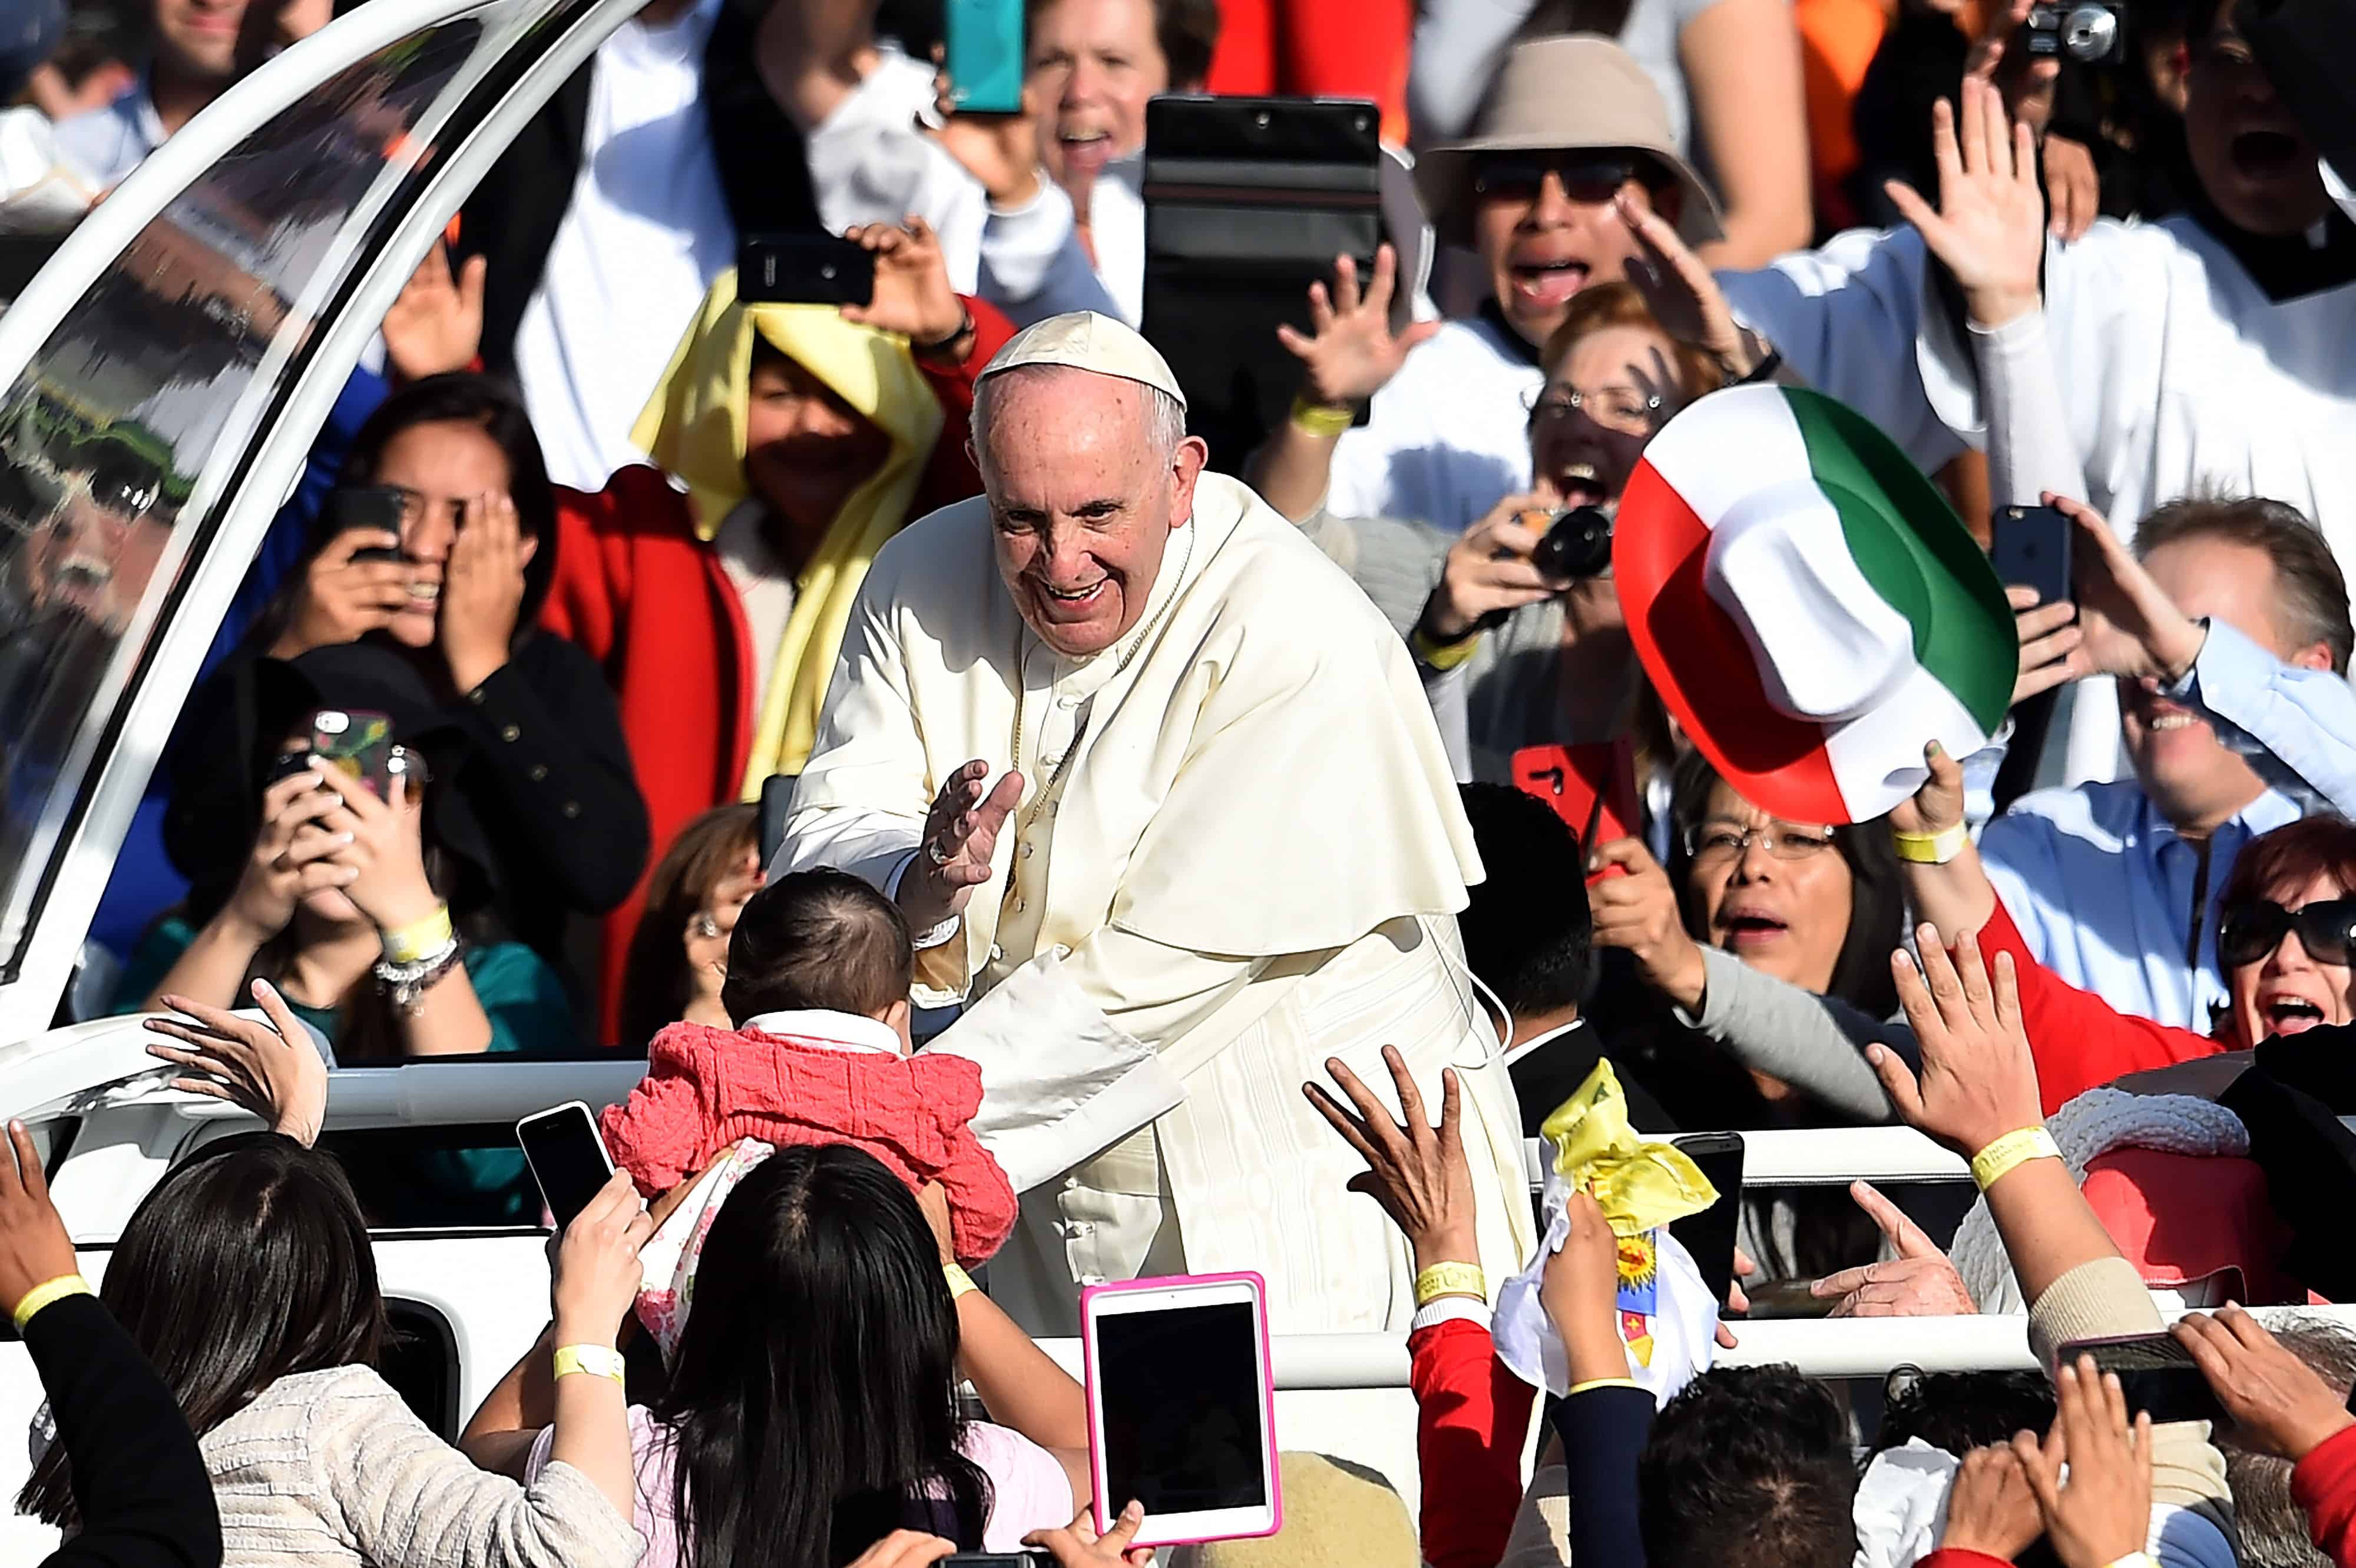 Pope Francis arrives in Mexico